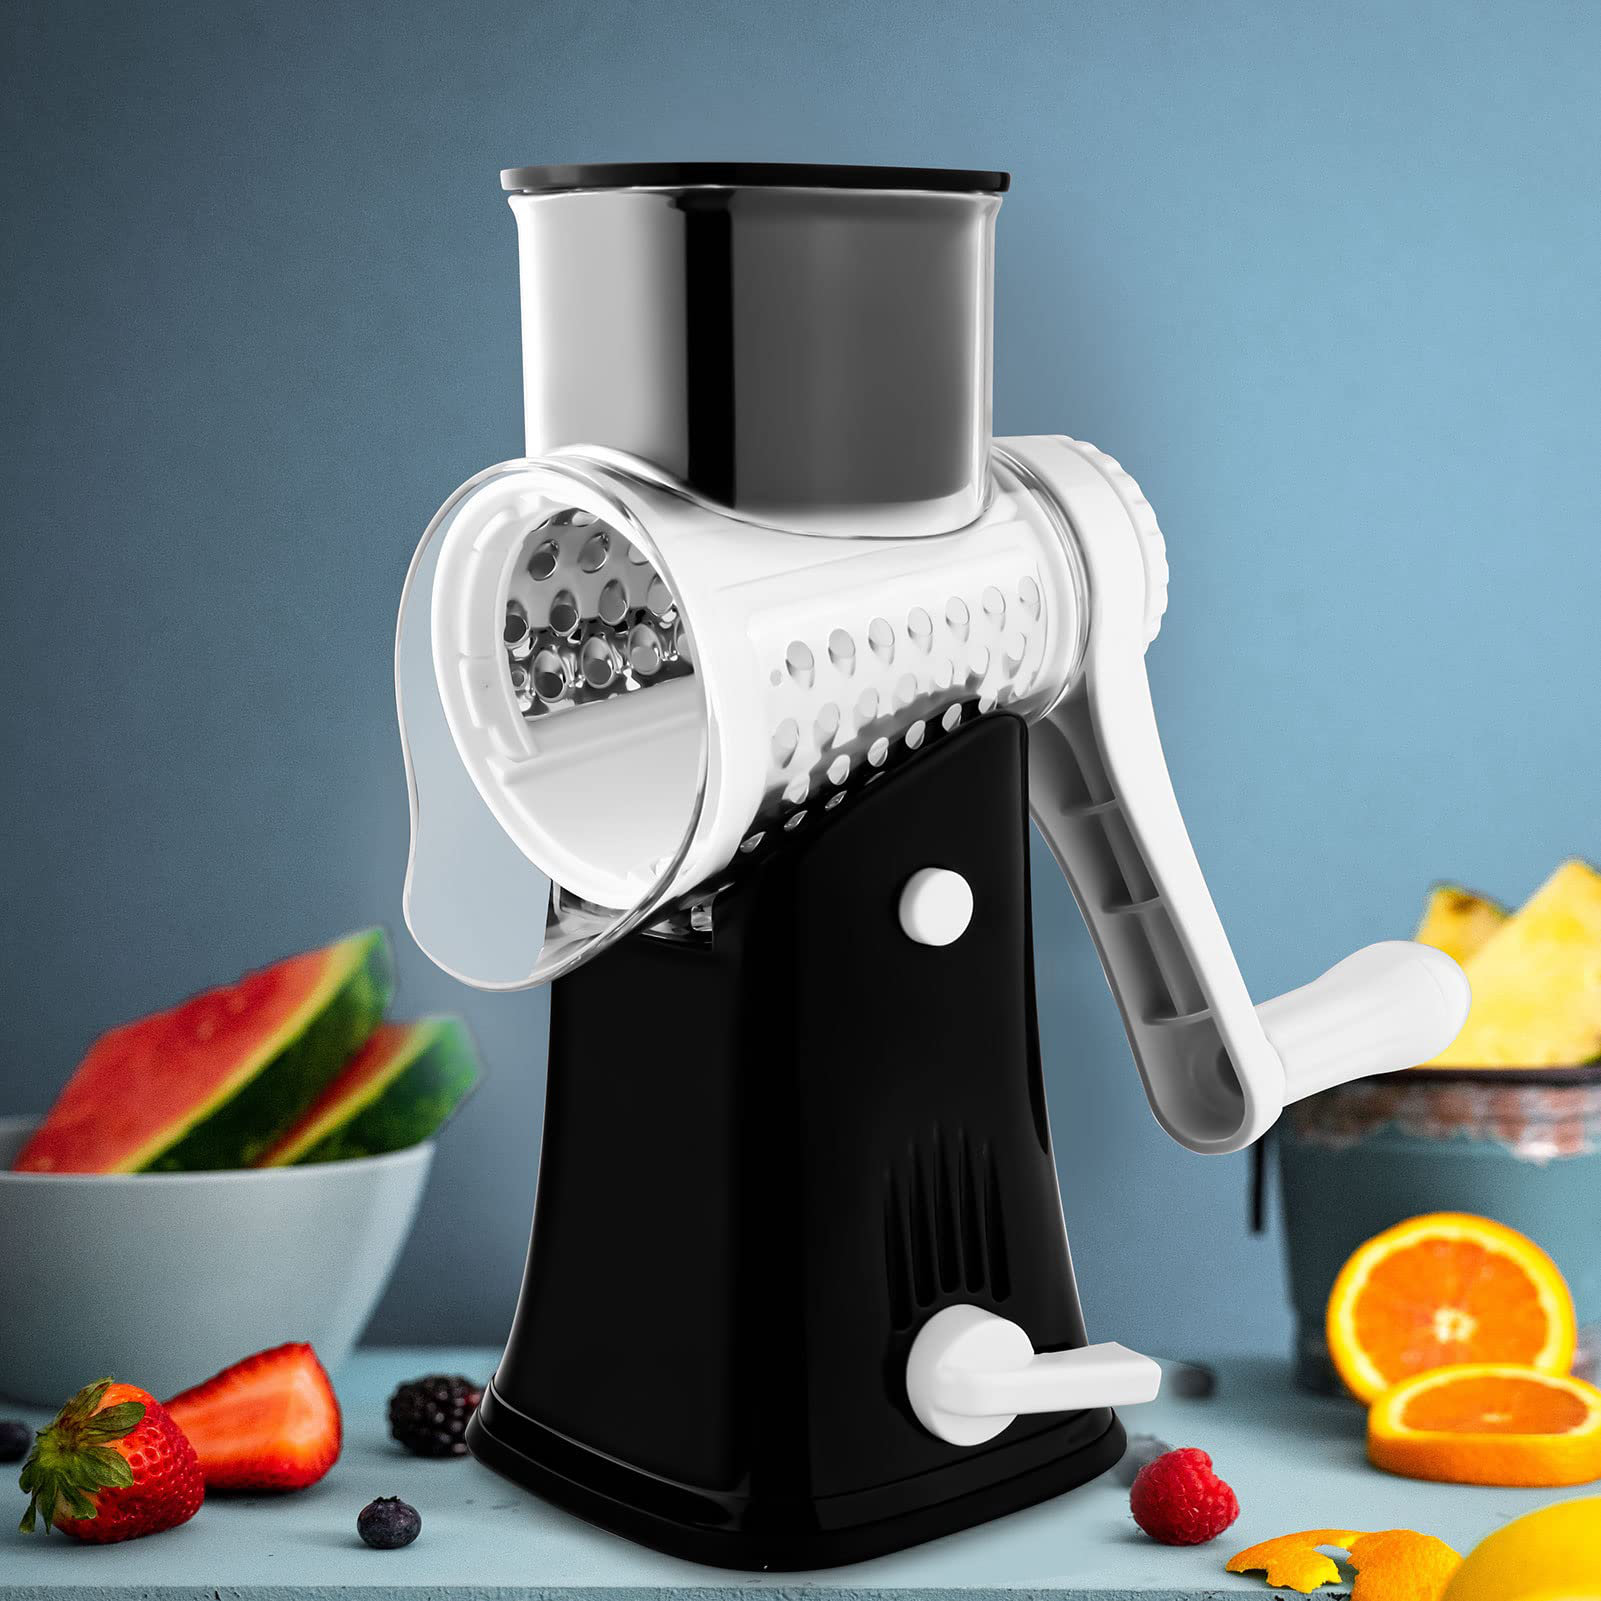 Rotary Cheese Grater with Handle & Upgraded Suction Base - Cheese Shredder  with 5 Interchangeable Stainless Steel Blades - Multifunctional Vegetable